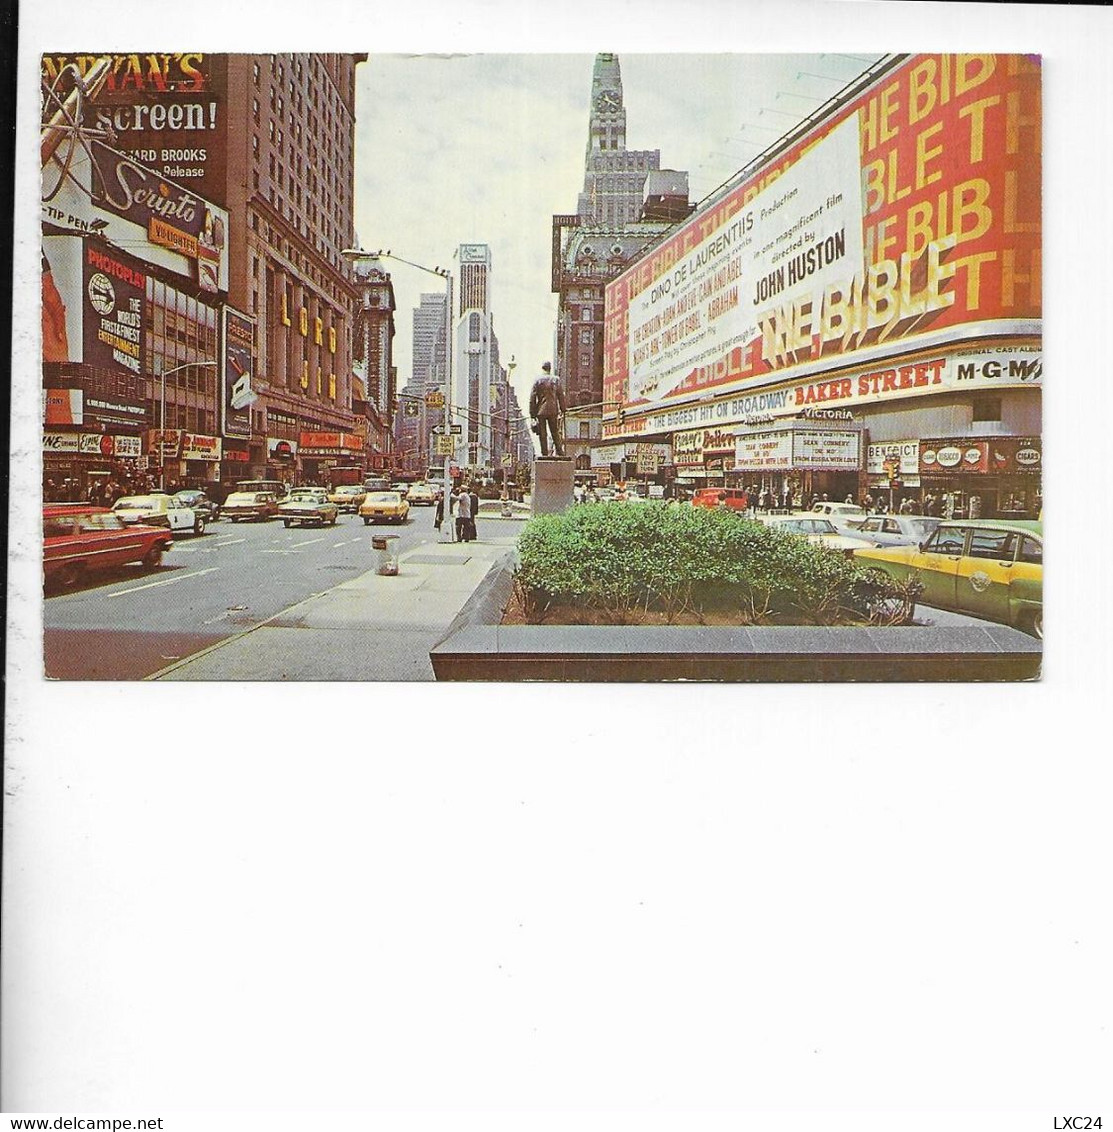 TIMES SQUARE. NEW YORK CITY. SHOWING THE NEW ALLIED CHEMICAL TOWER BUILDINGS. - Time Square